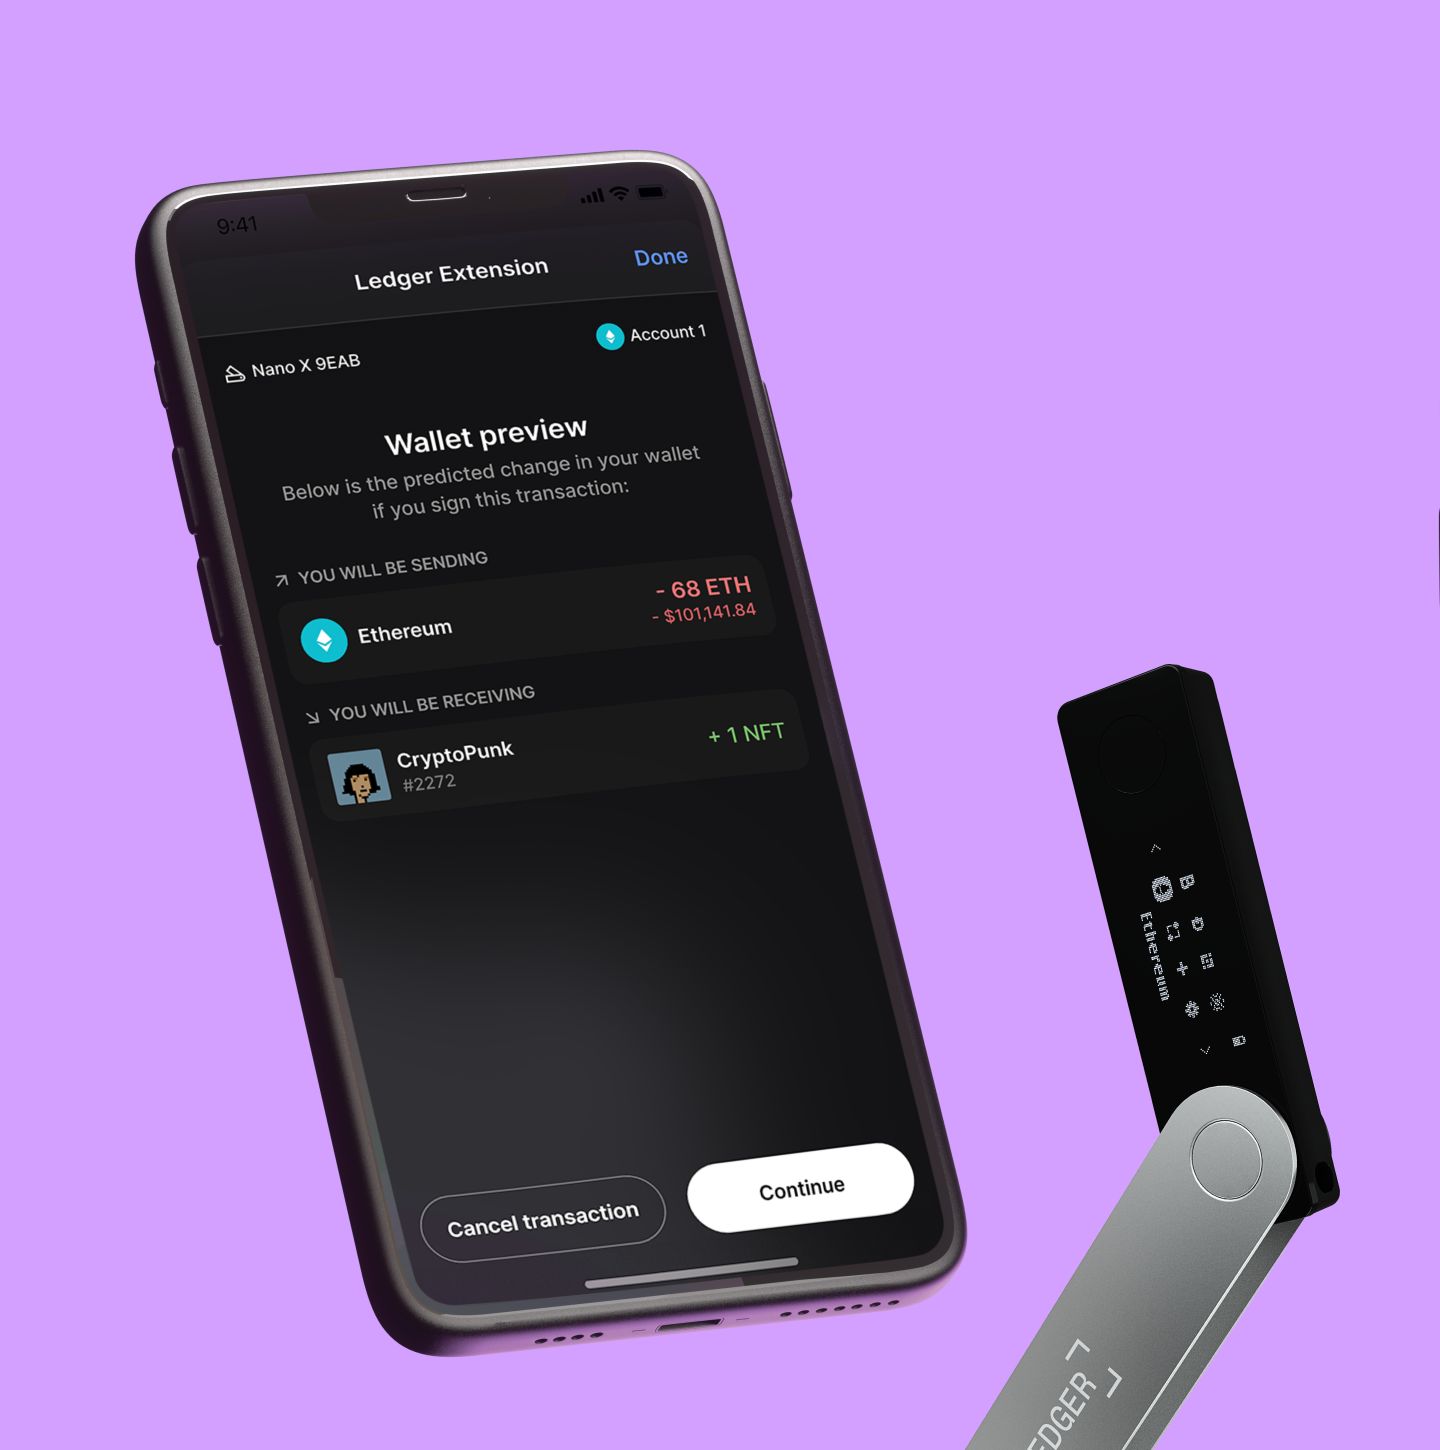 New Ledger Nano X Can Pair With iPhone Via Bluetooth | cointime.fun